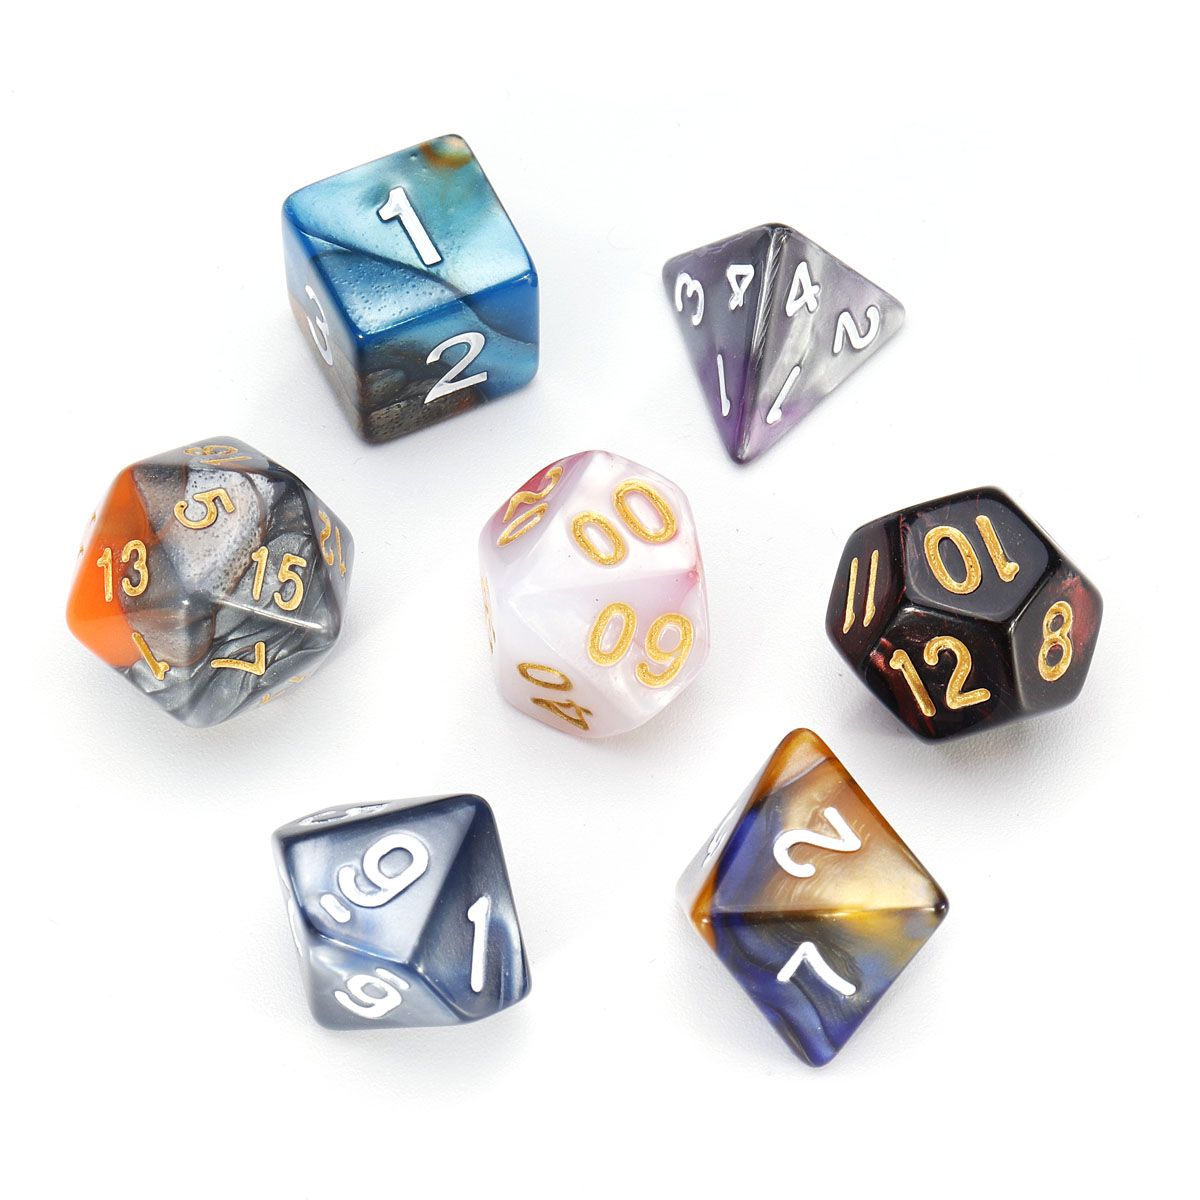 7Pcs-Polyhedral-Dices-Double-Color-For-Role-Playing-Game-Dice-Set-With-Storage-Bag-1422309